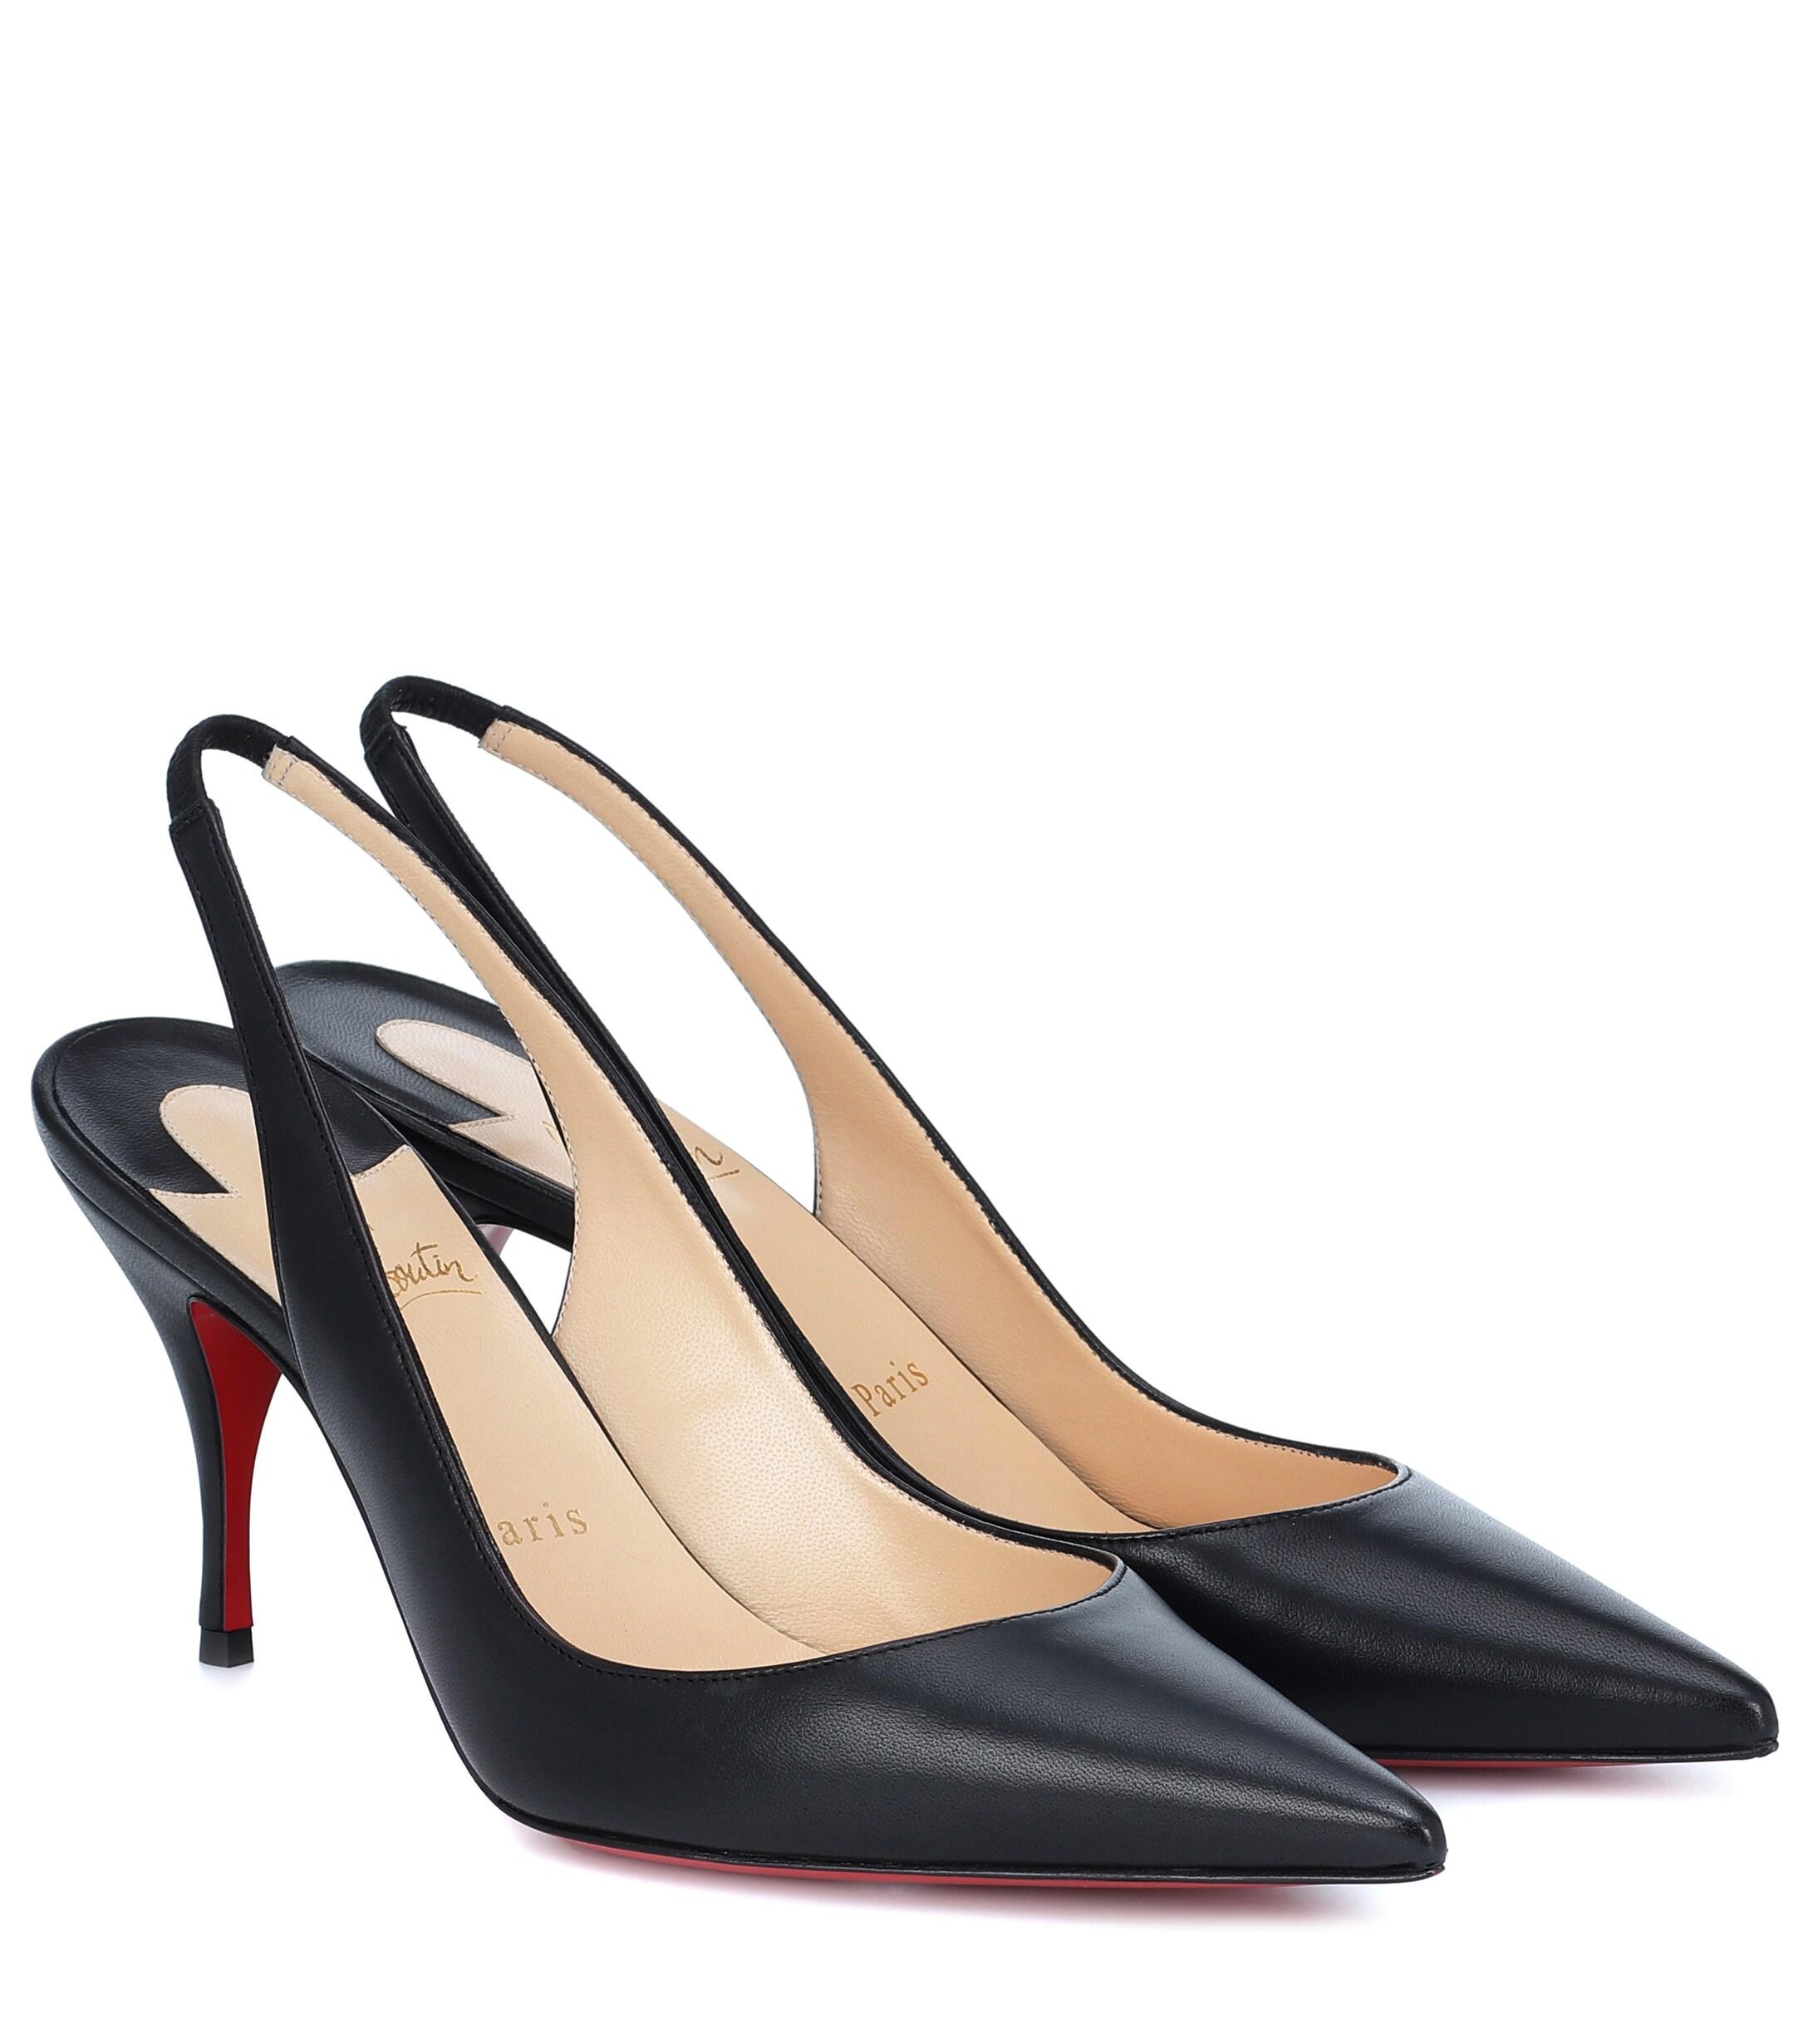 Christian Louboutin Clare Sling 80 Leather Slingback Pump in Black 